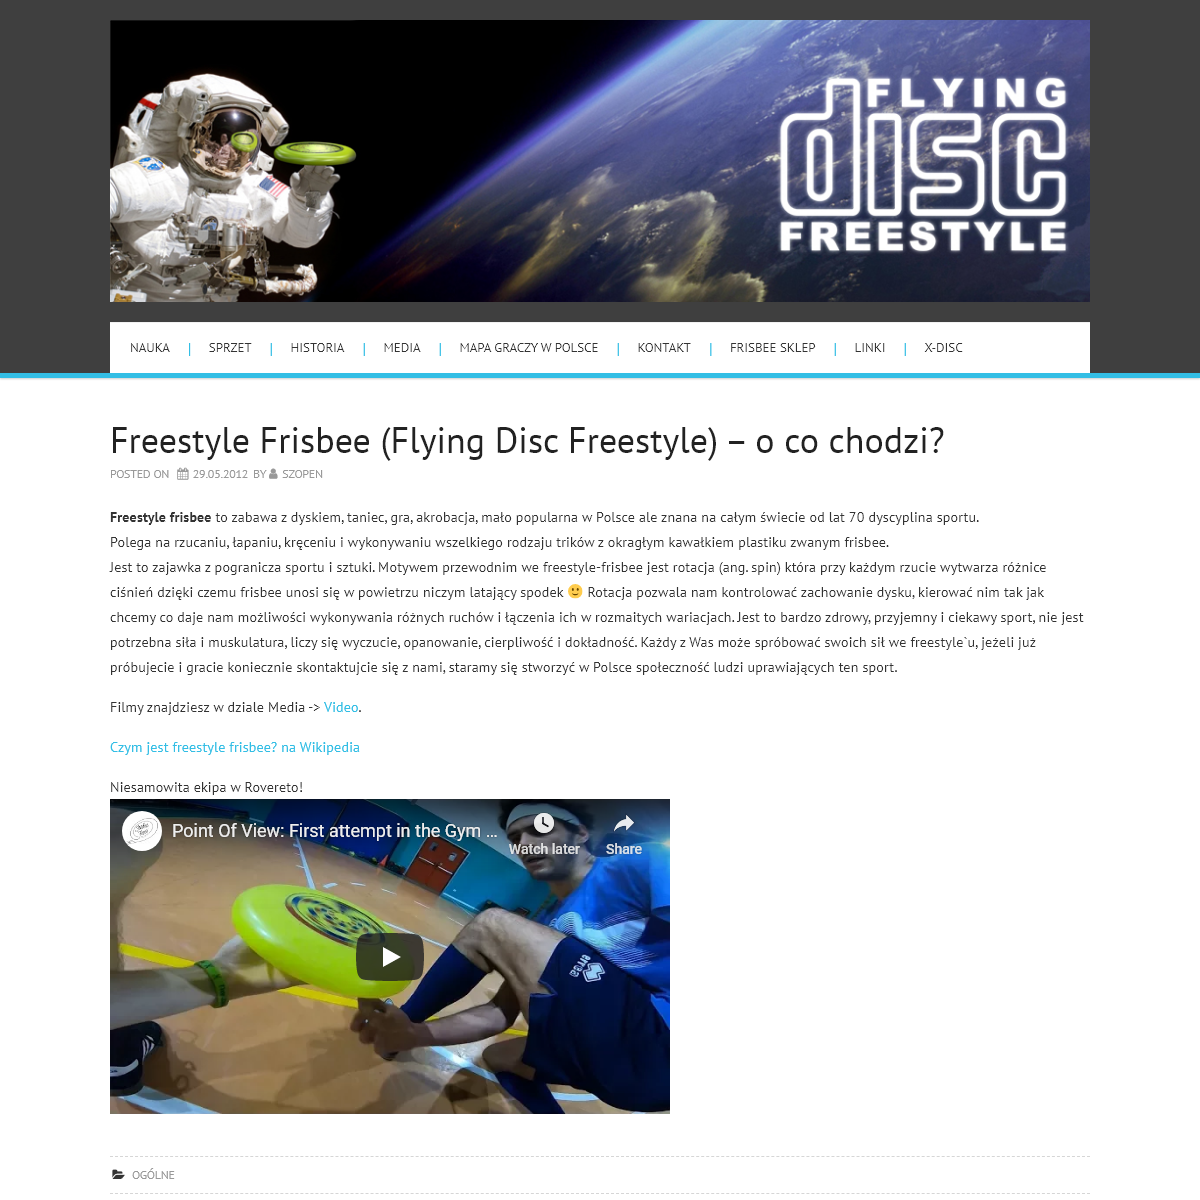 A complete backup of freestylefrisbee.pl